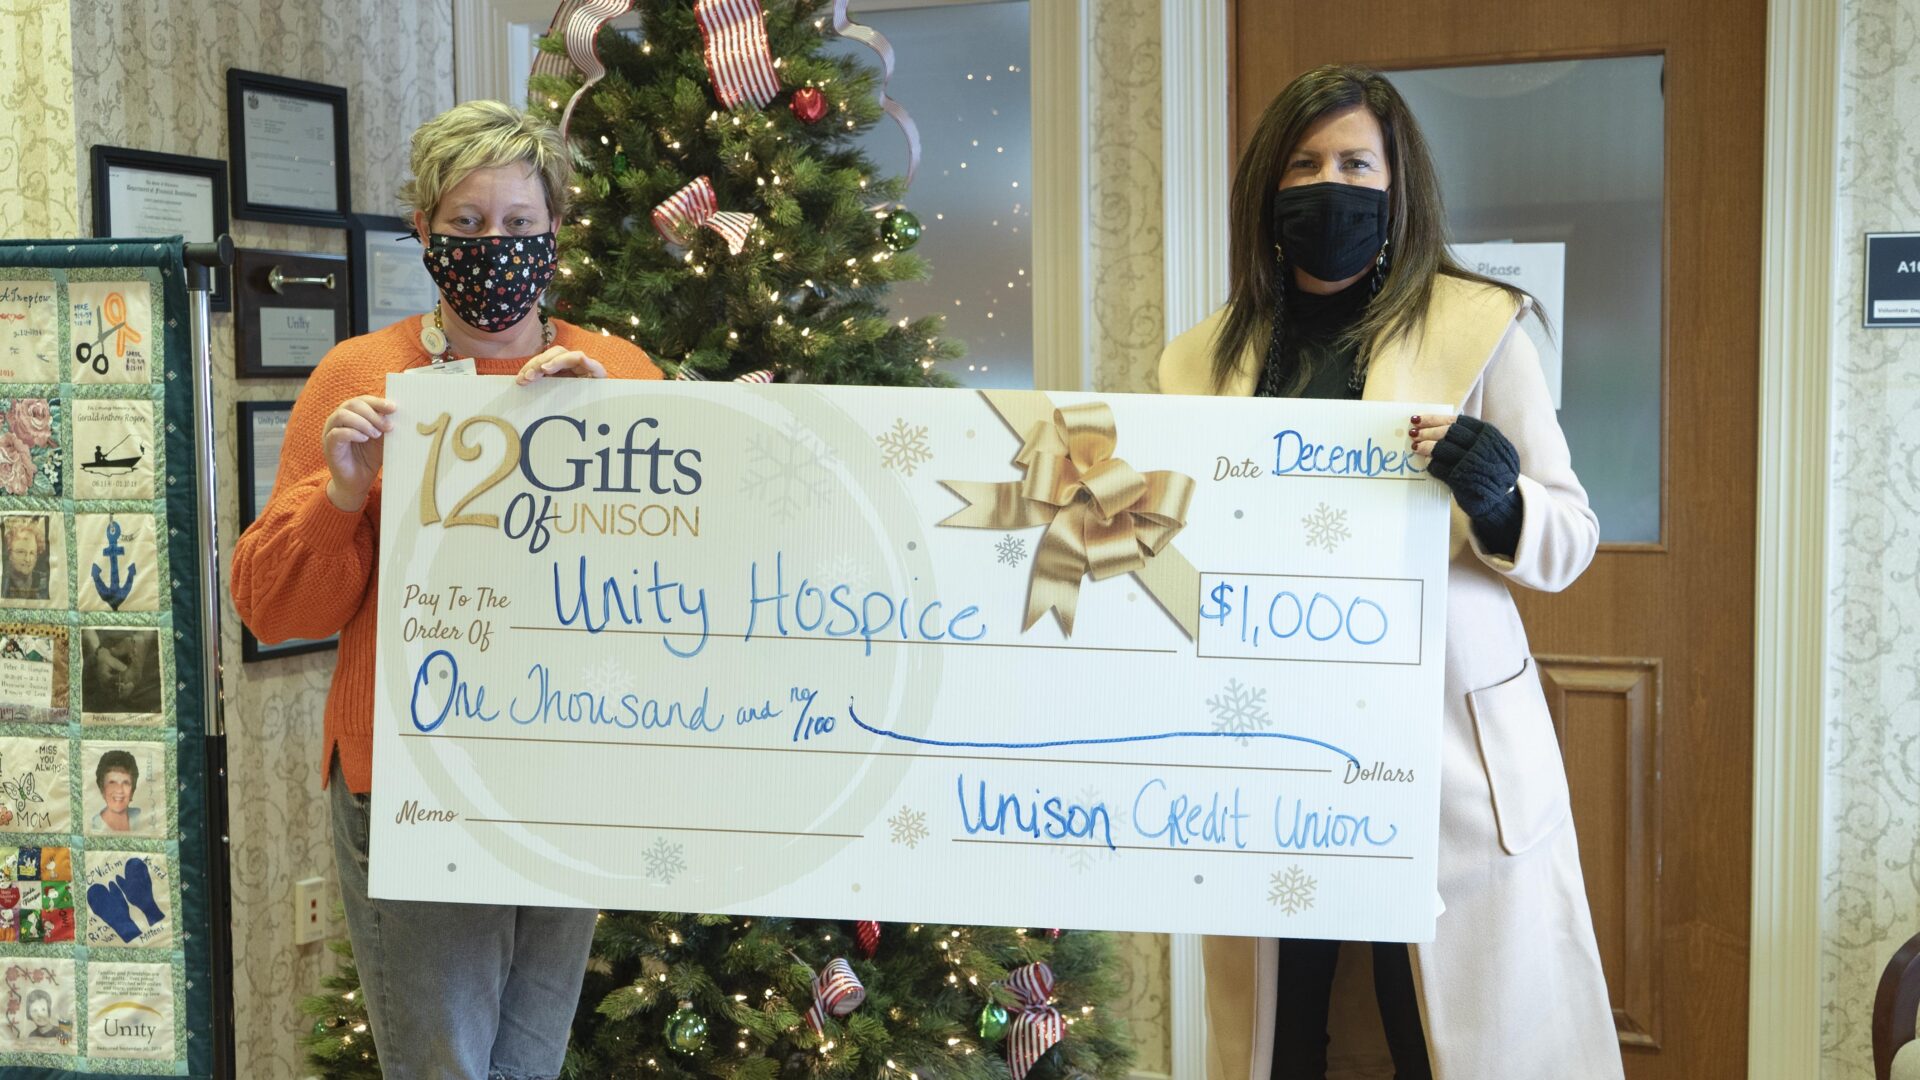 12 Gifts - Unity Hospice